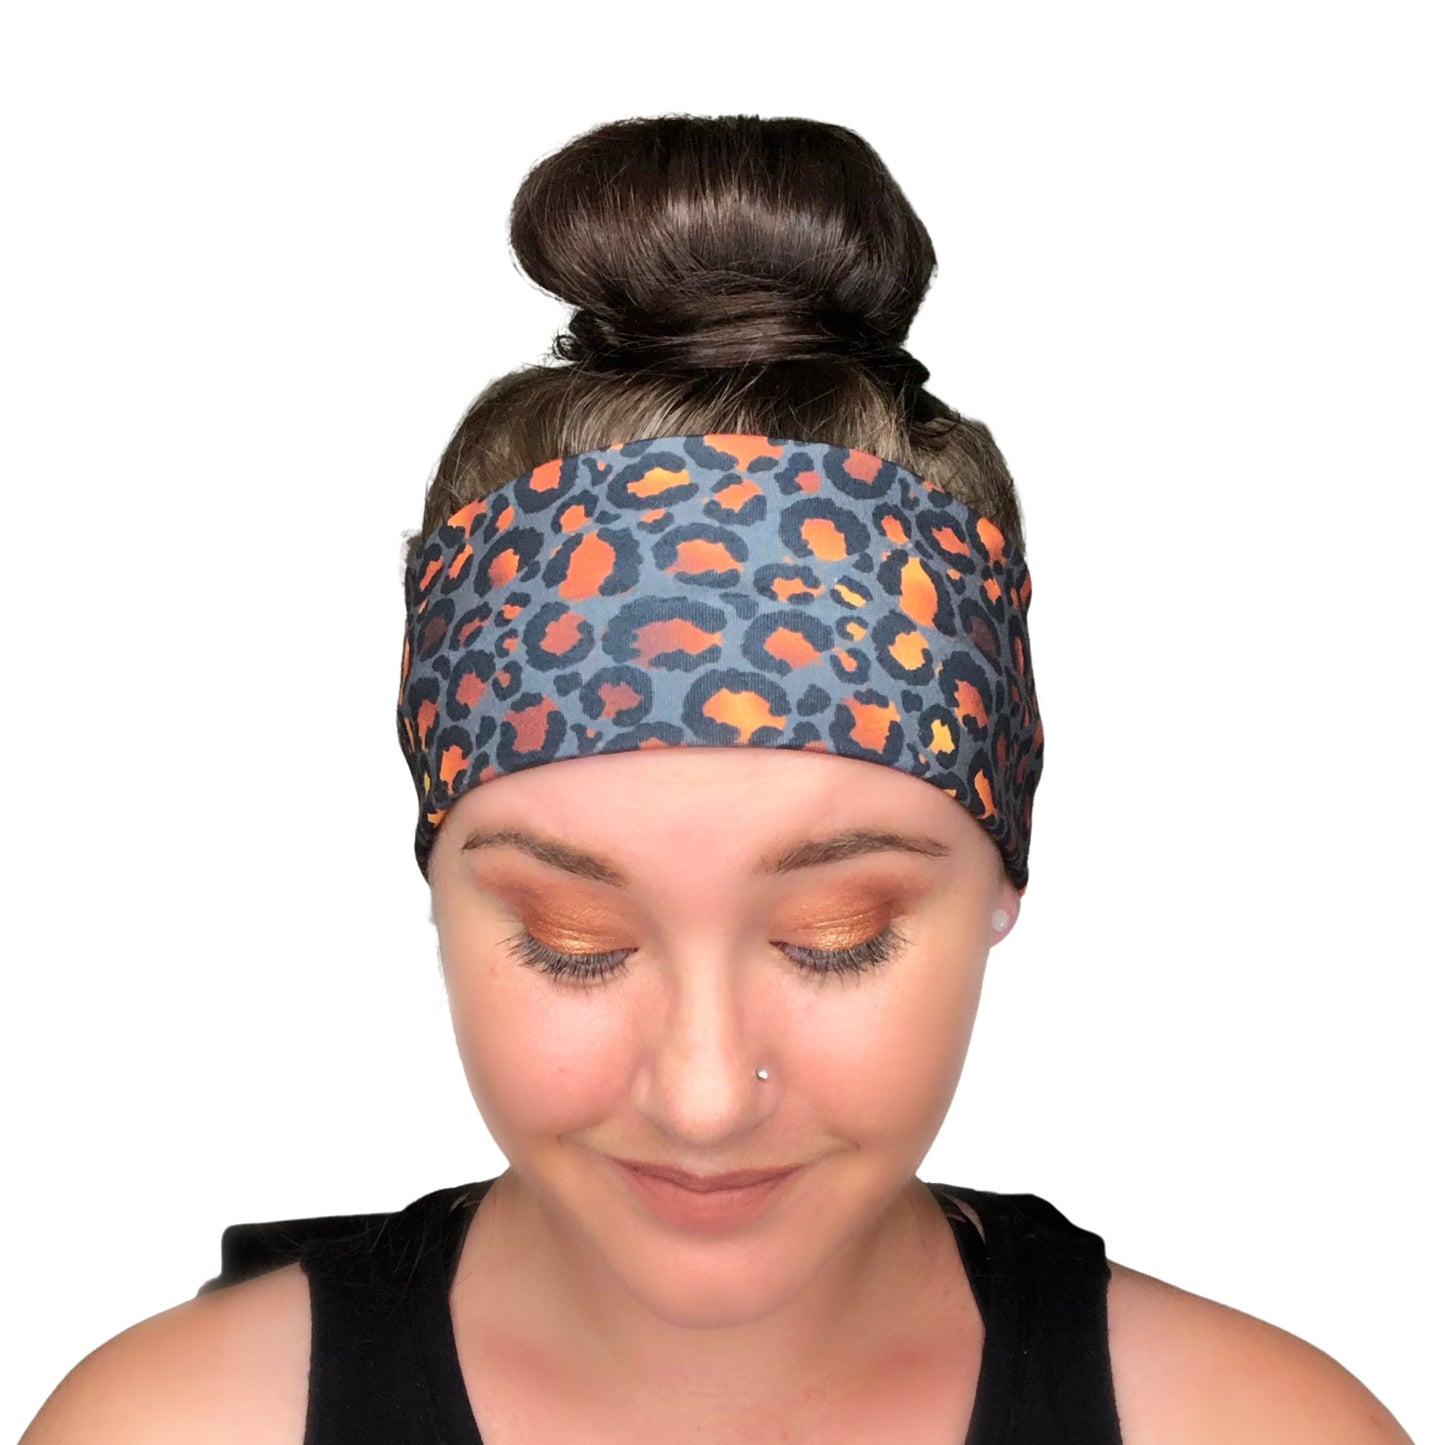 Blue and Peach Floral Print Headband for Women